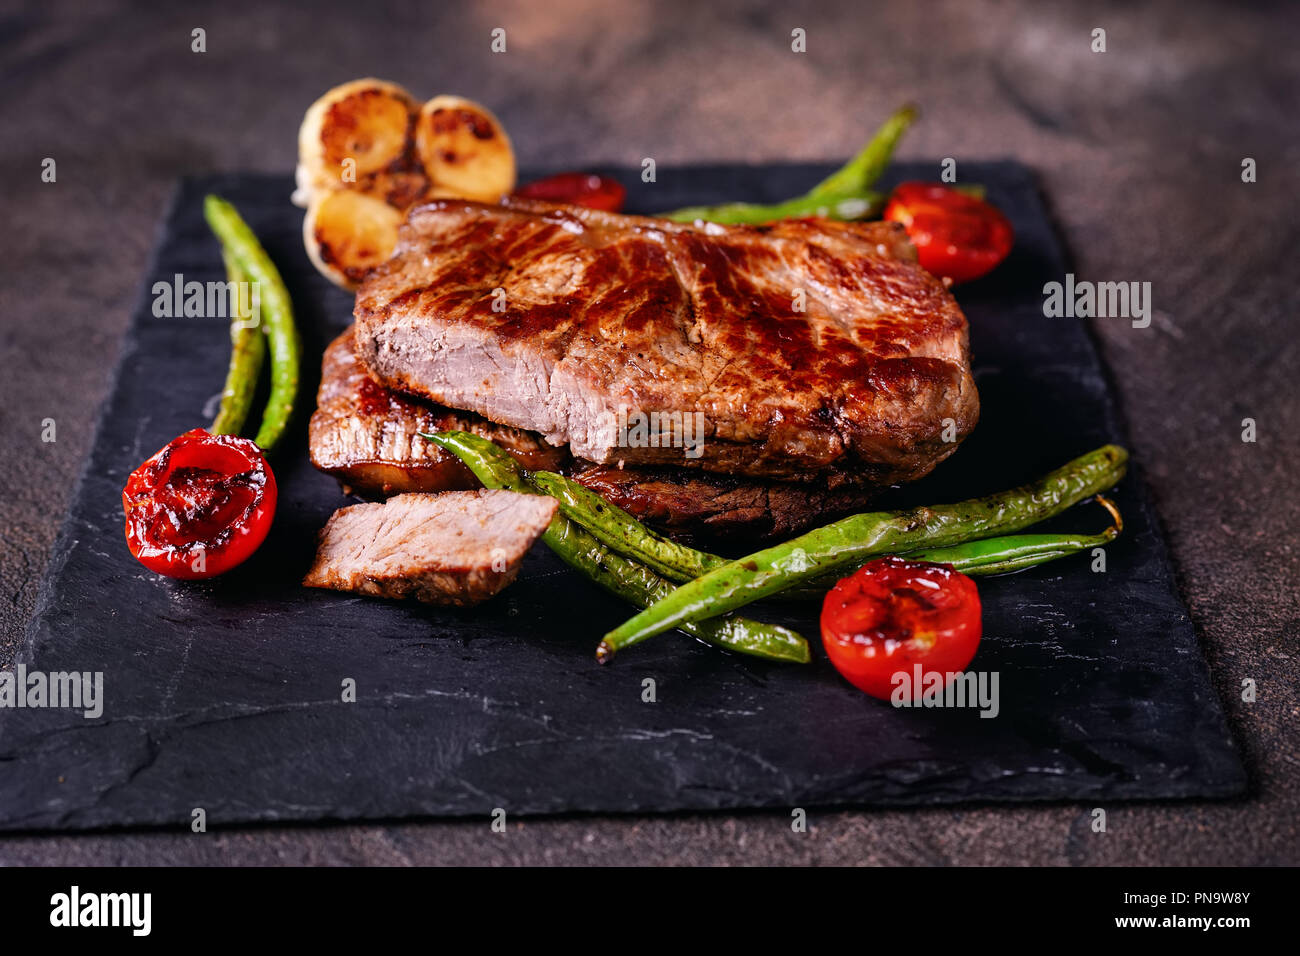 Prepared delicious beaf steaks with vegetables on slate plate Stock Photo